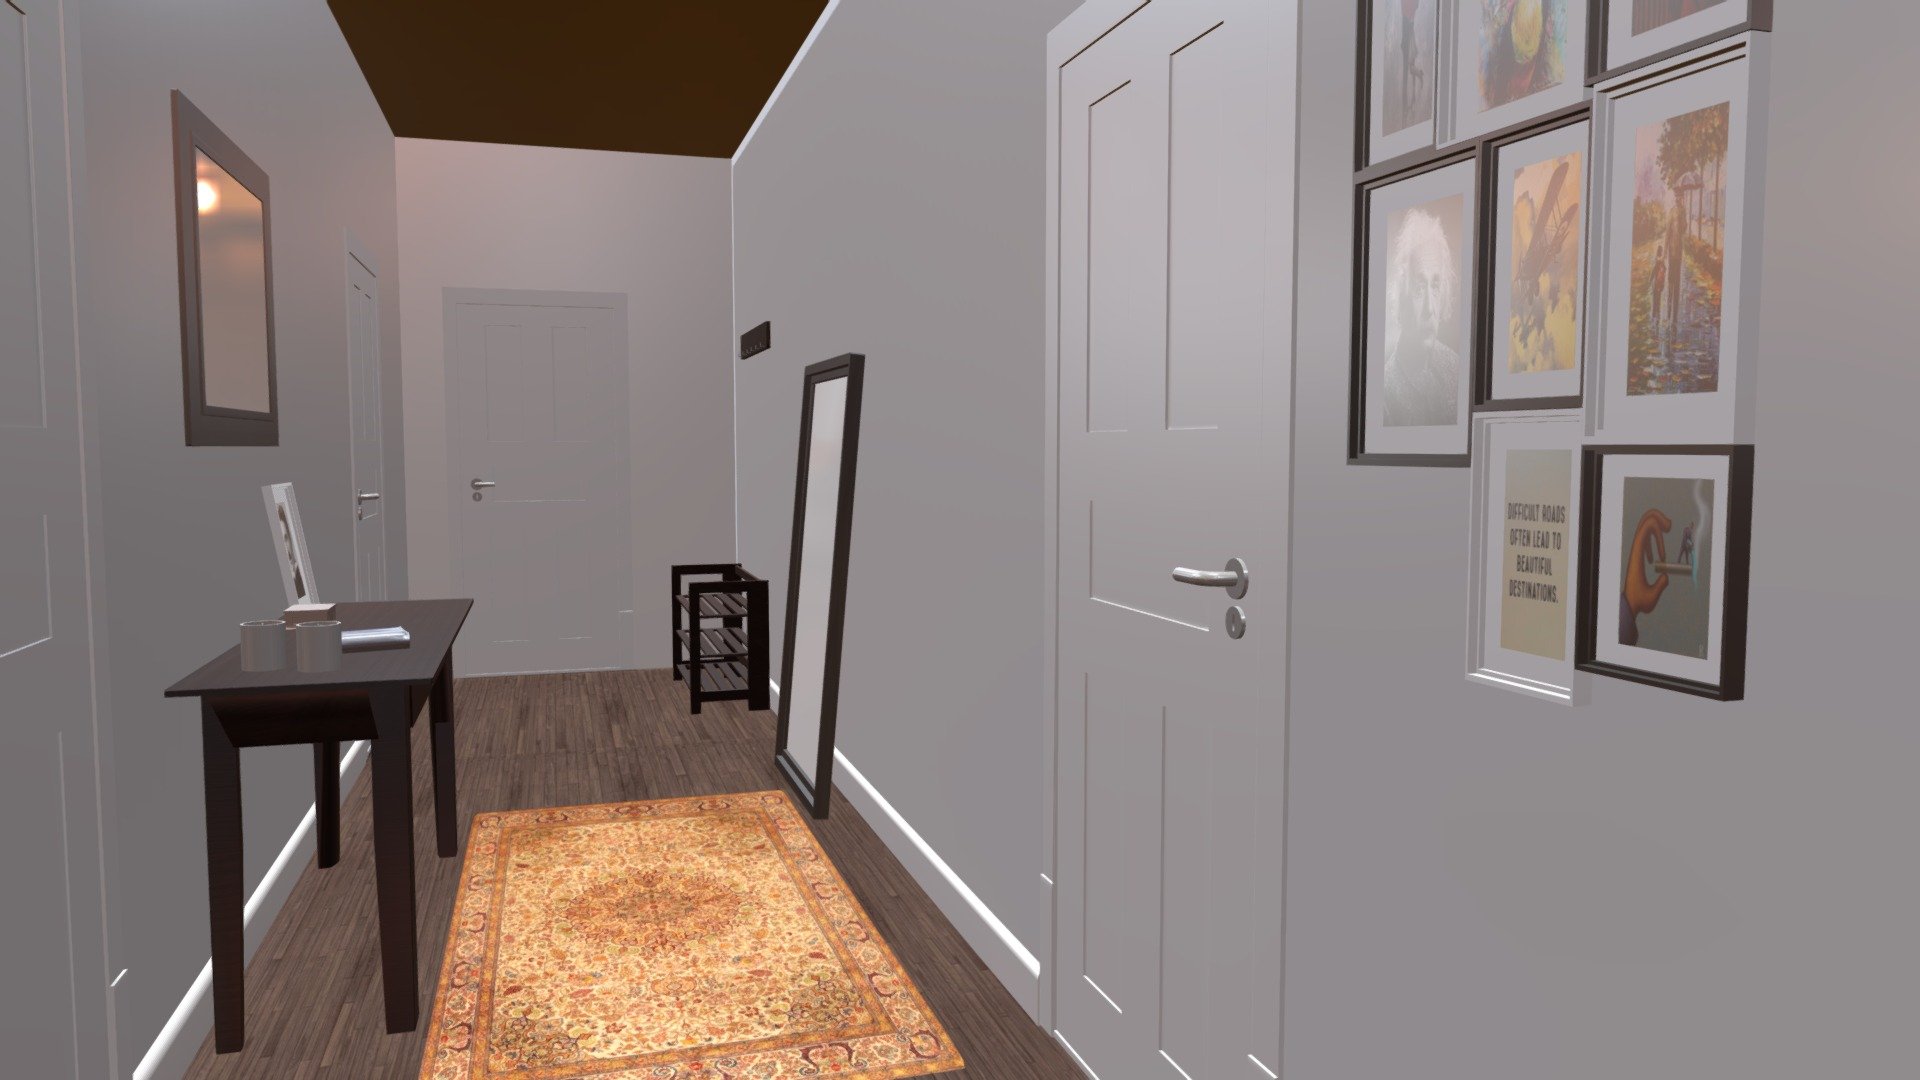 A hallway with multiple doors - Hallway - Download Free 3D model by skaljowsky 3d model